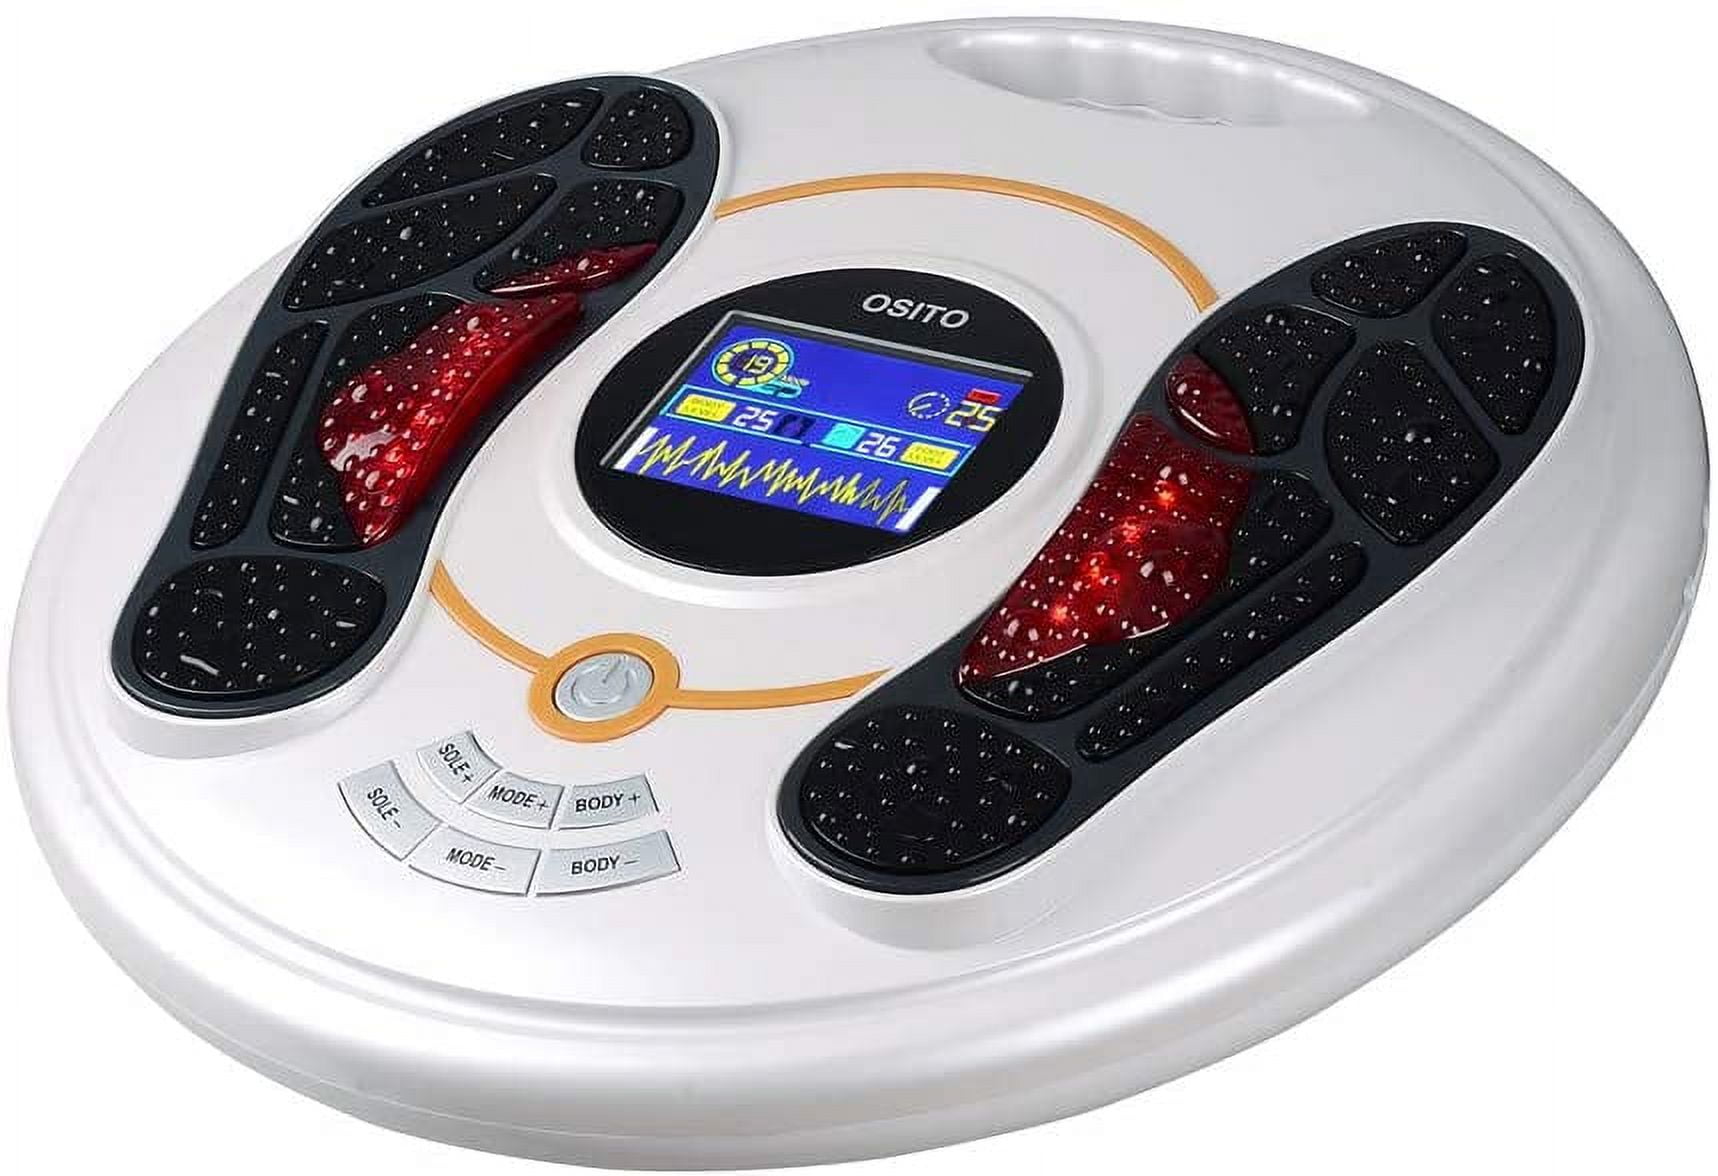 Creliver EMS & TENS Foot Circulation Stimulator - Electric EMS Foot  Massager for Circulation and Pai…See more Creliver EMS & TENS Foot  Circulation